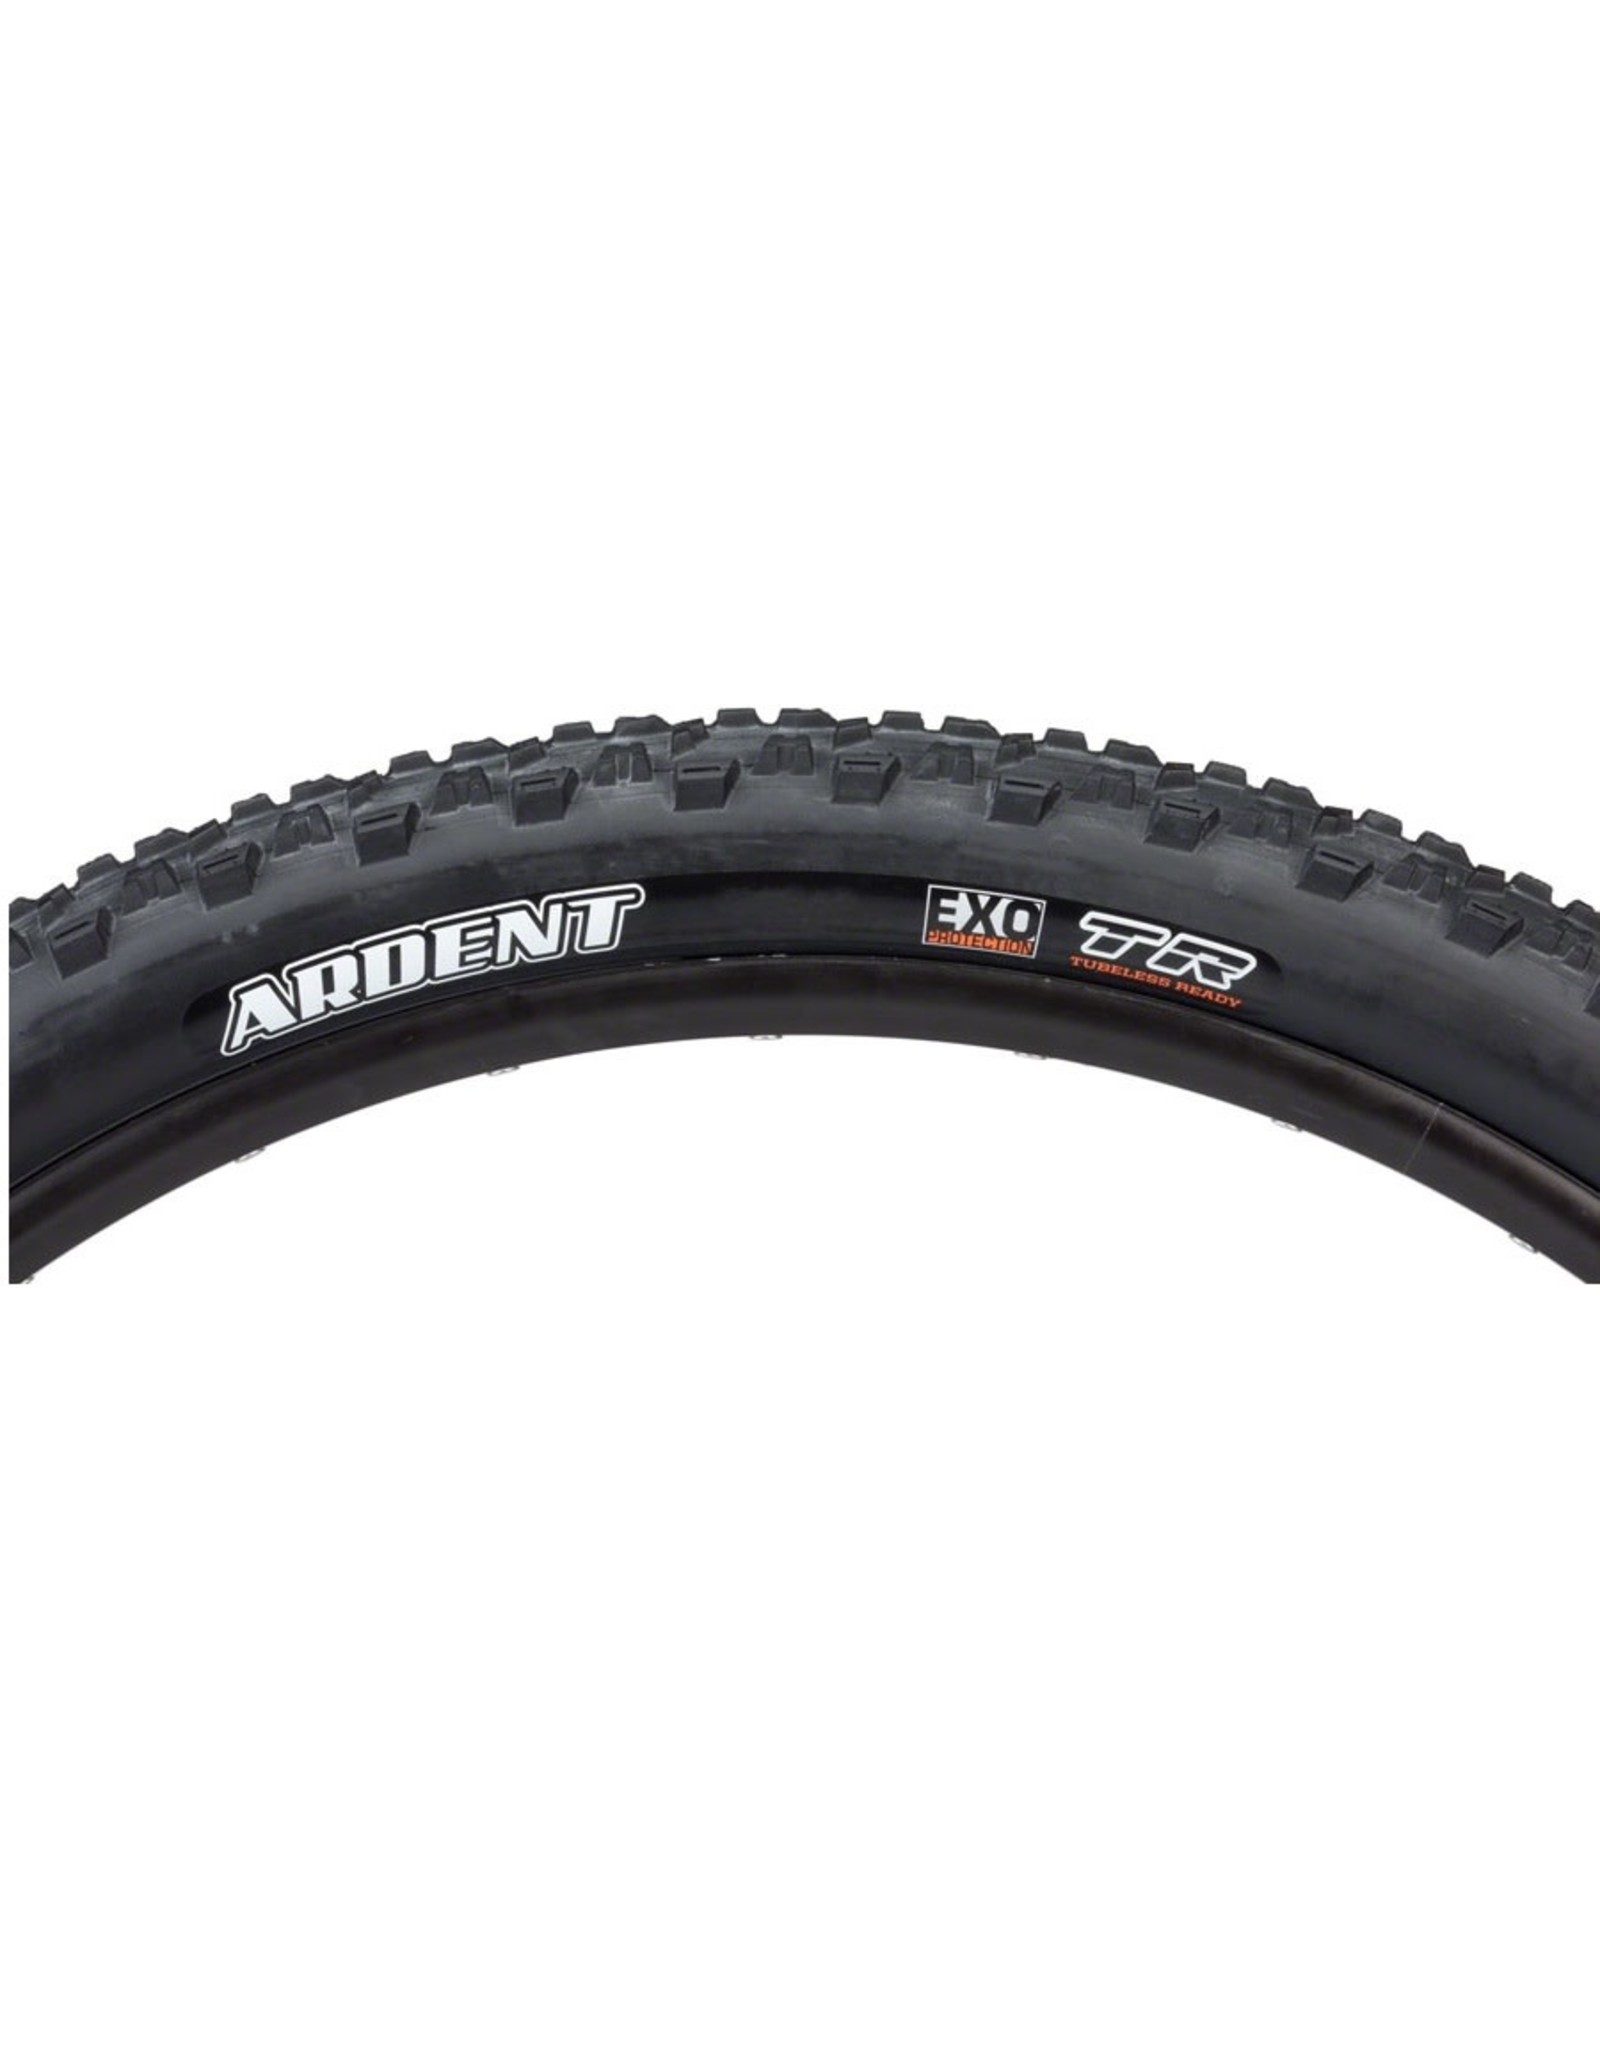 NEW Maxxis Ardent 27.5 x 2.25 Tire, Folding, 60tpi, Dual Compound, EXO